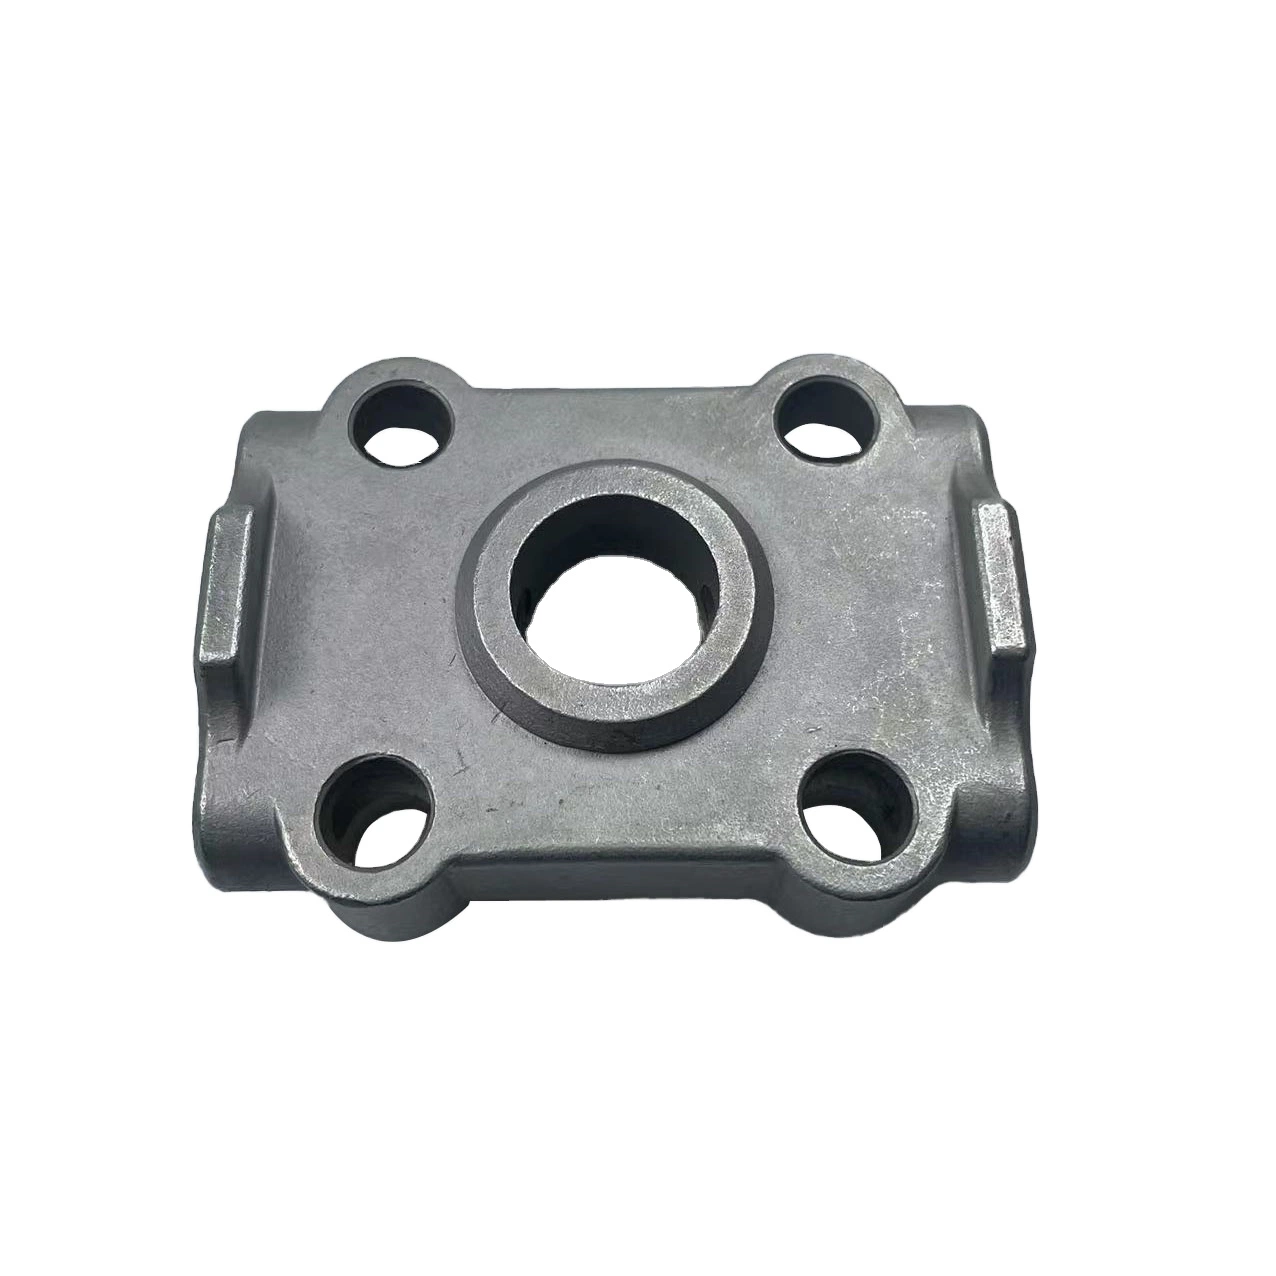 Precision Casting Part, Lost Wax Casting, Aluminum Casting Investment Casting Stainless Steel/Brass Casting/Casting Services